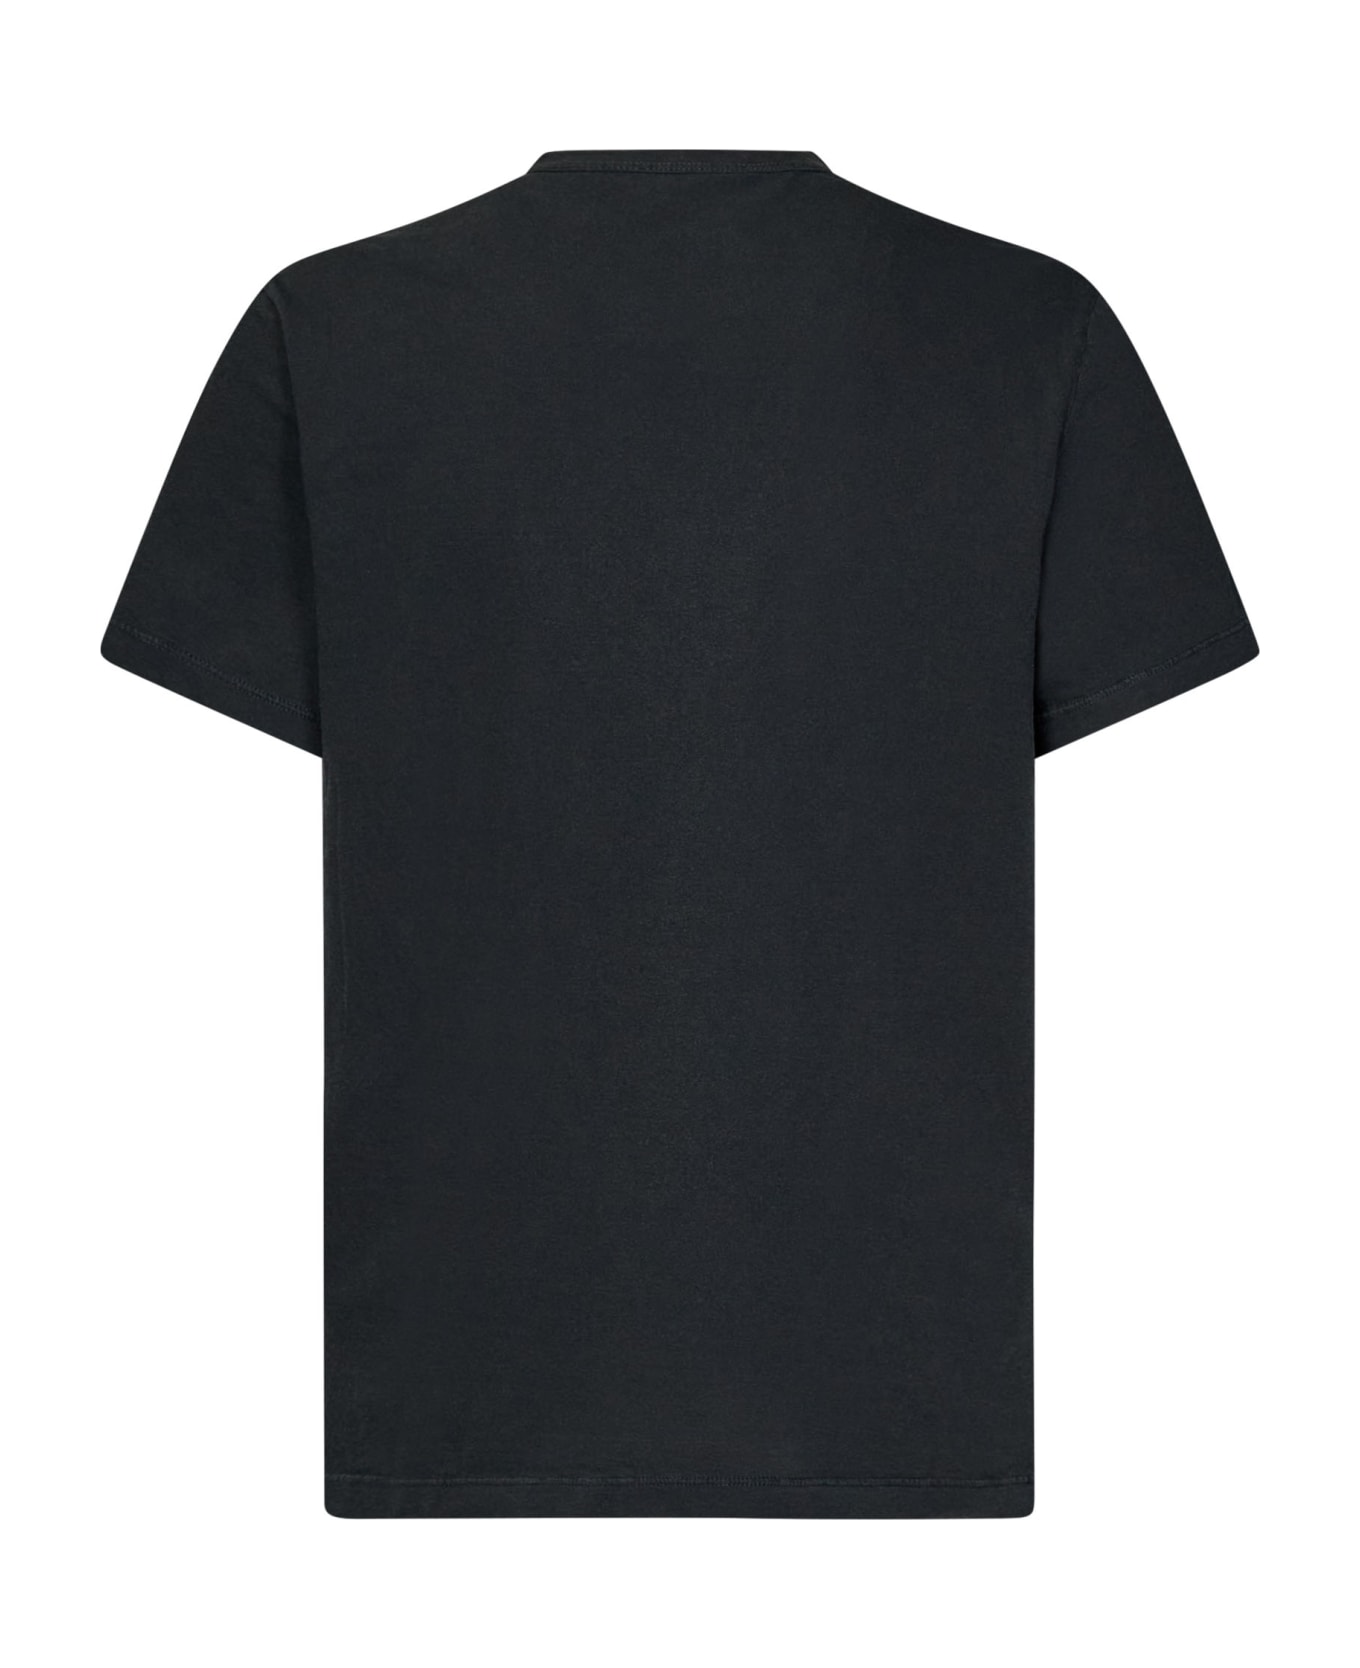 James Perse T-shirt - Carbone